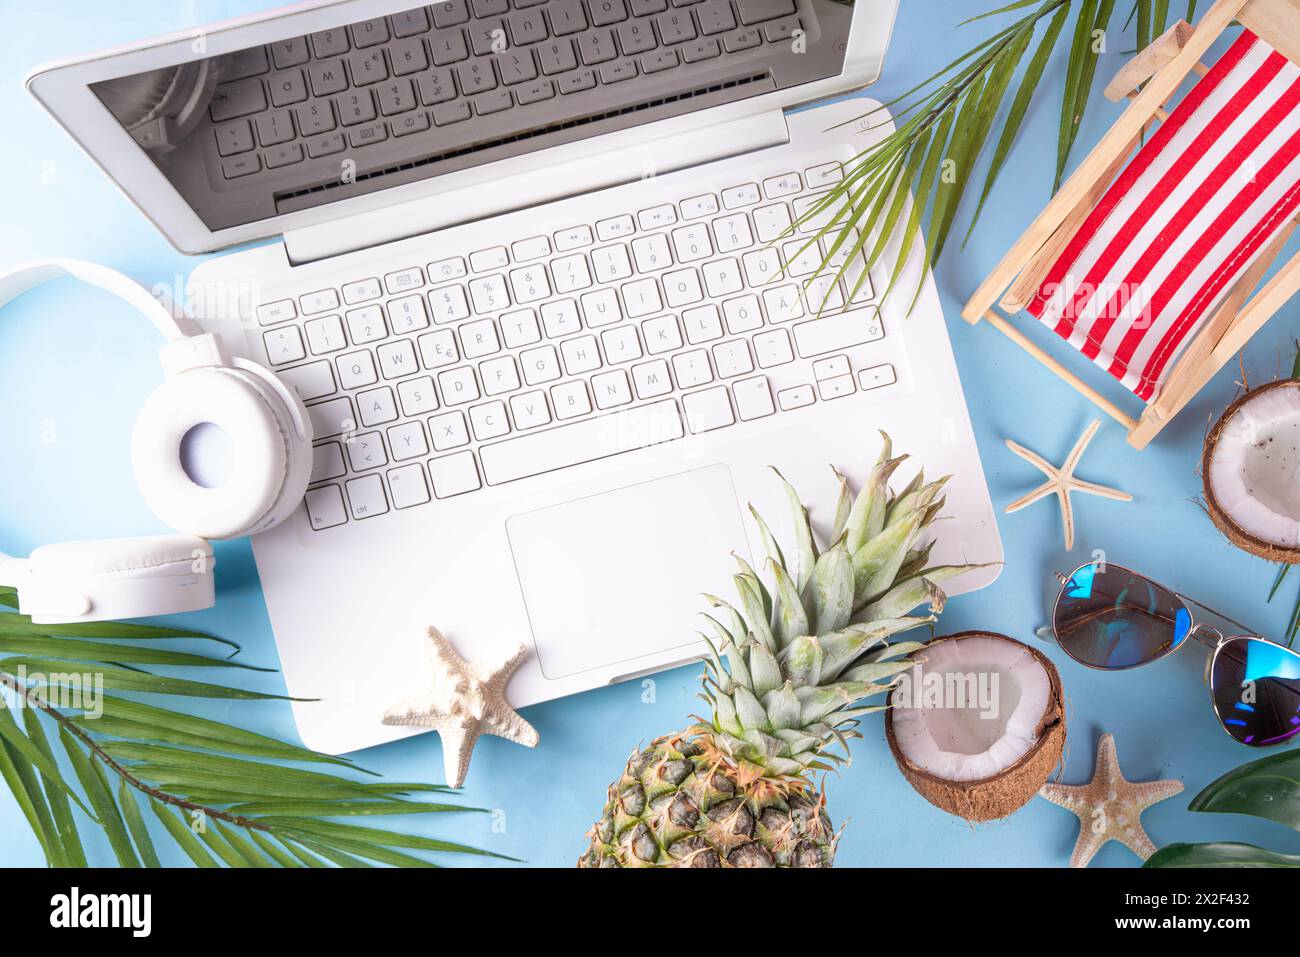 Work and vacation. Creative summer beach office flat lay with white laptop, tropical summer accessories, palm tree leaves, sunglasses, flip flops, pin Stock Photo